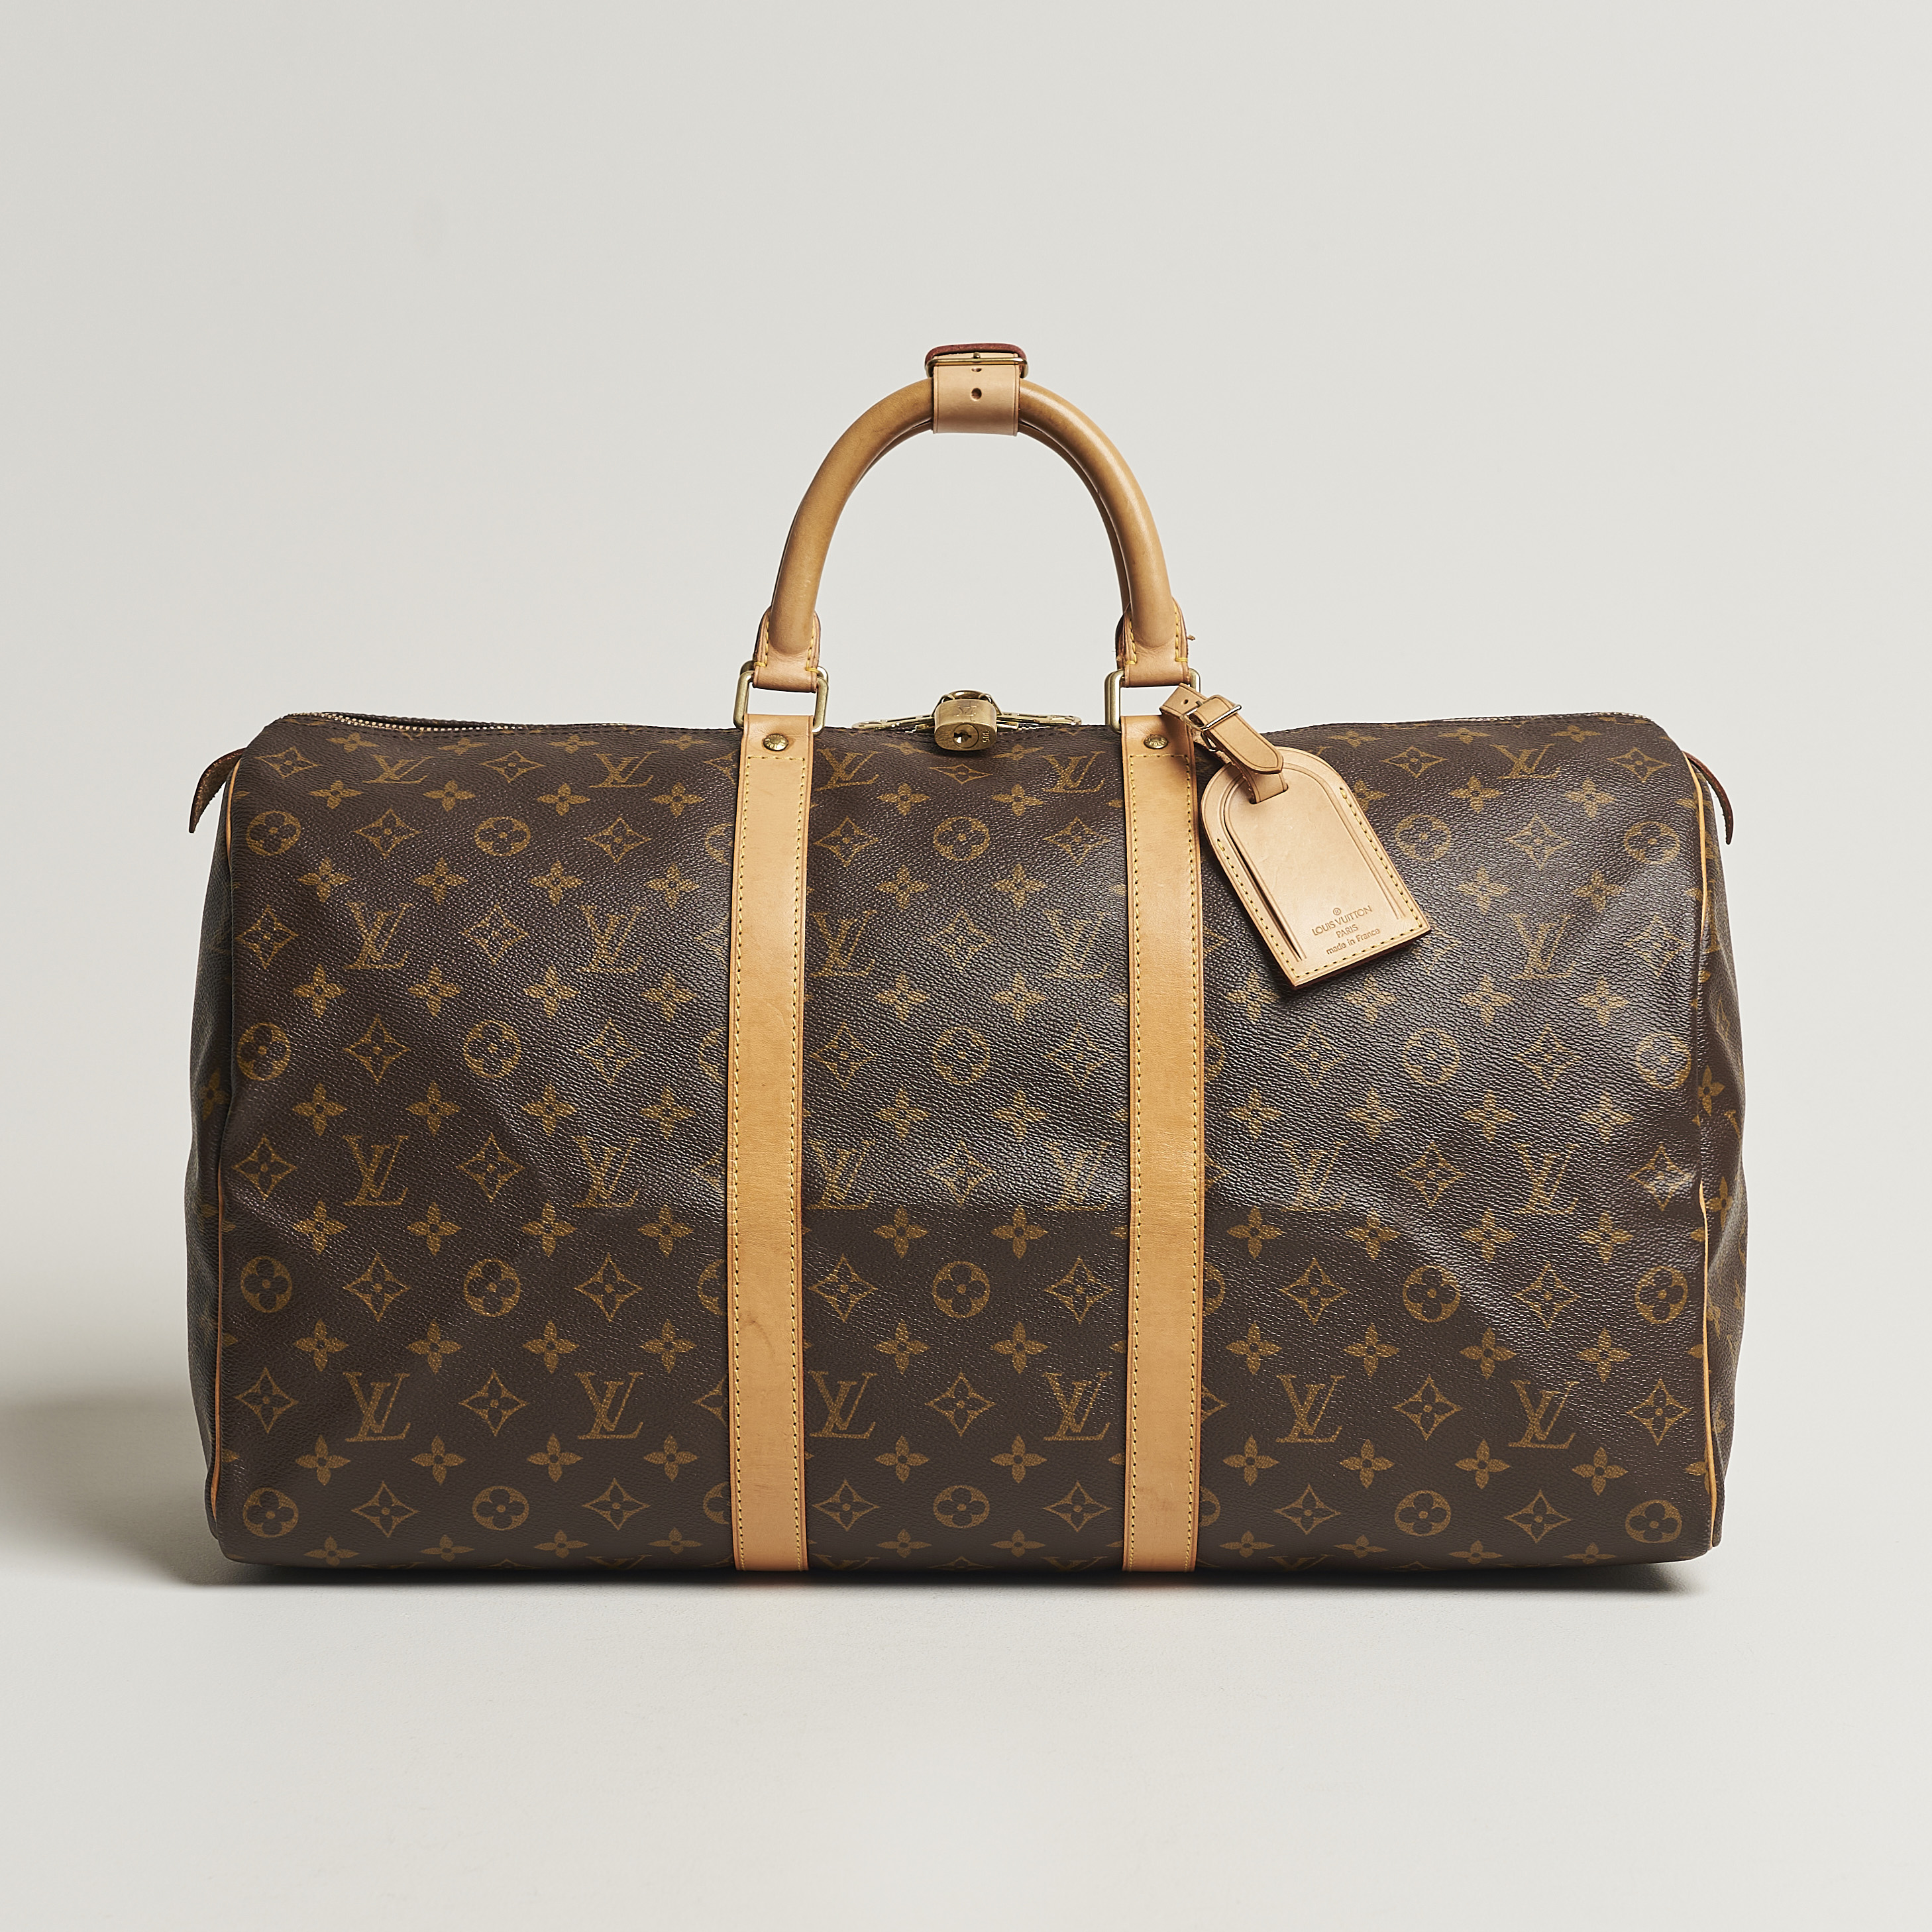 The hand bag silver Louis Vuitton worn by Drake on his account